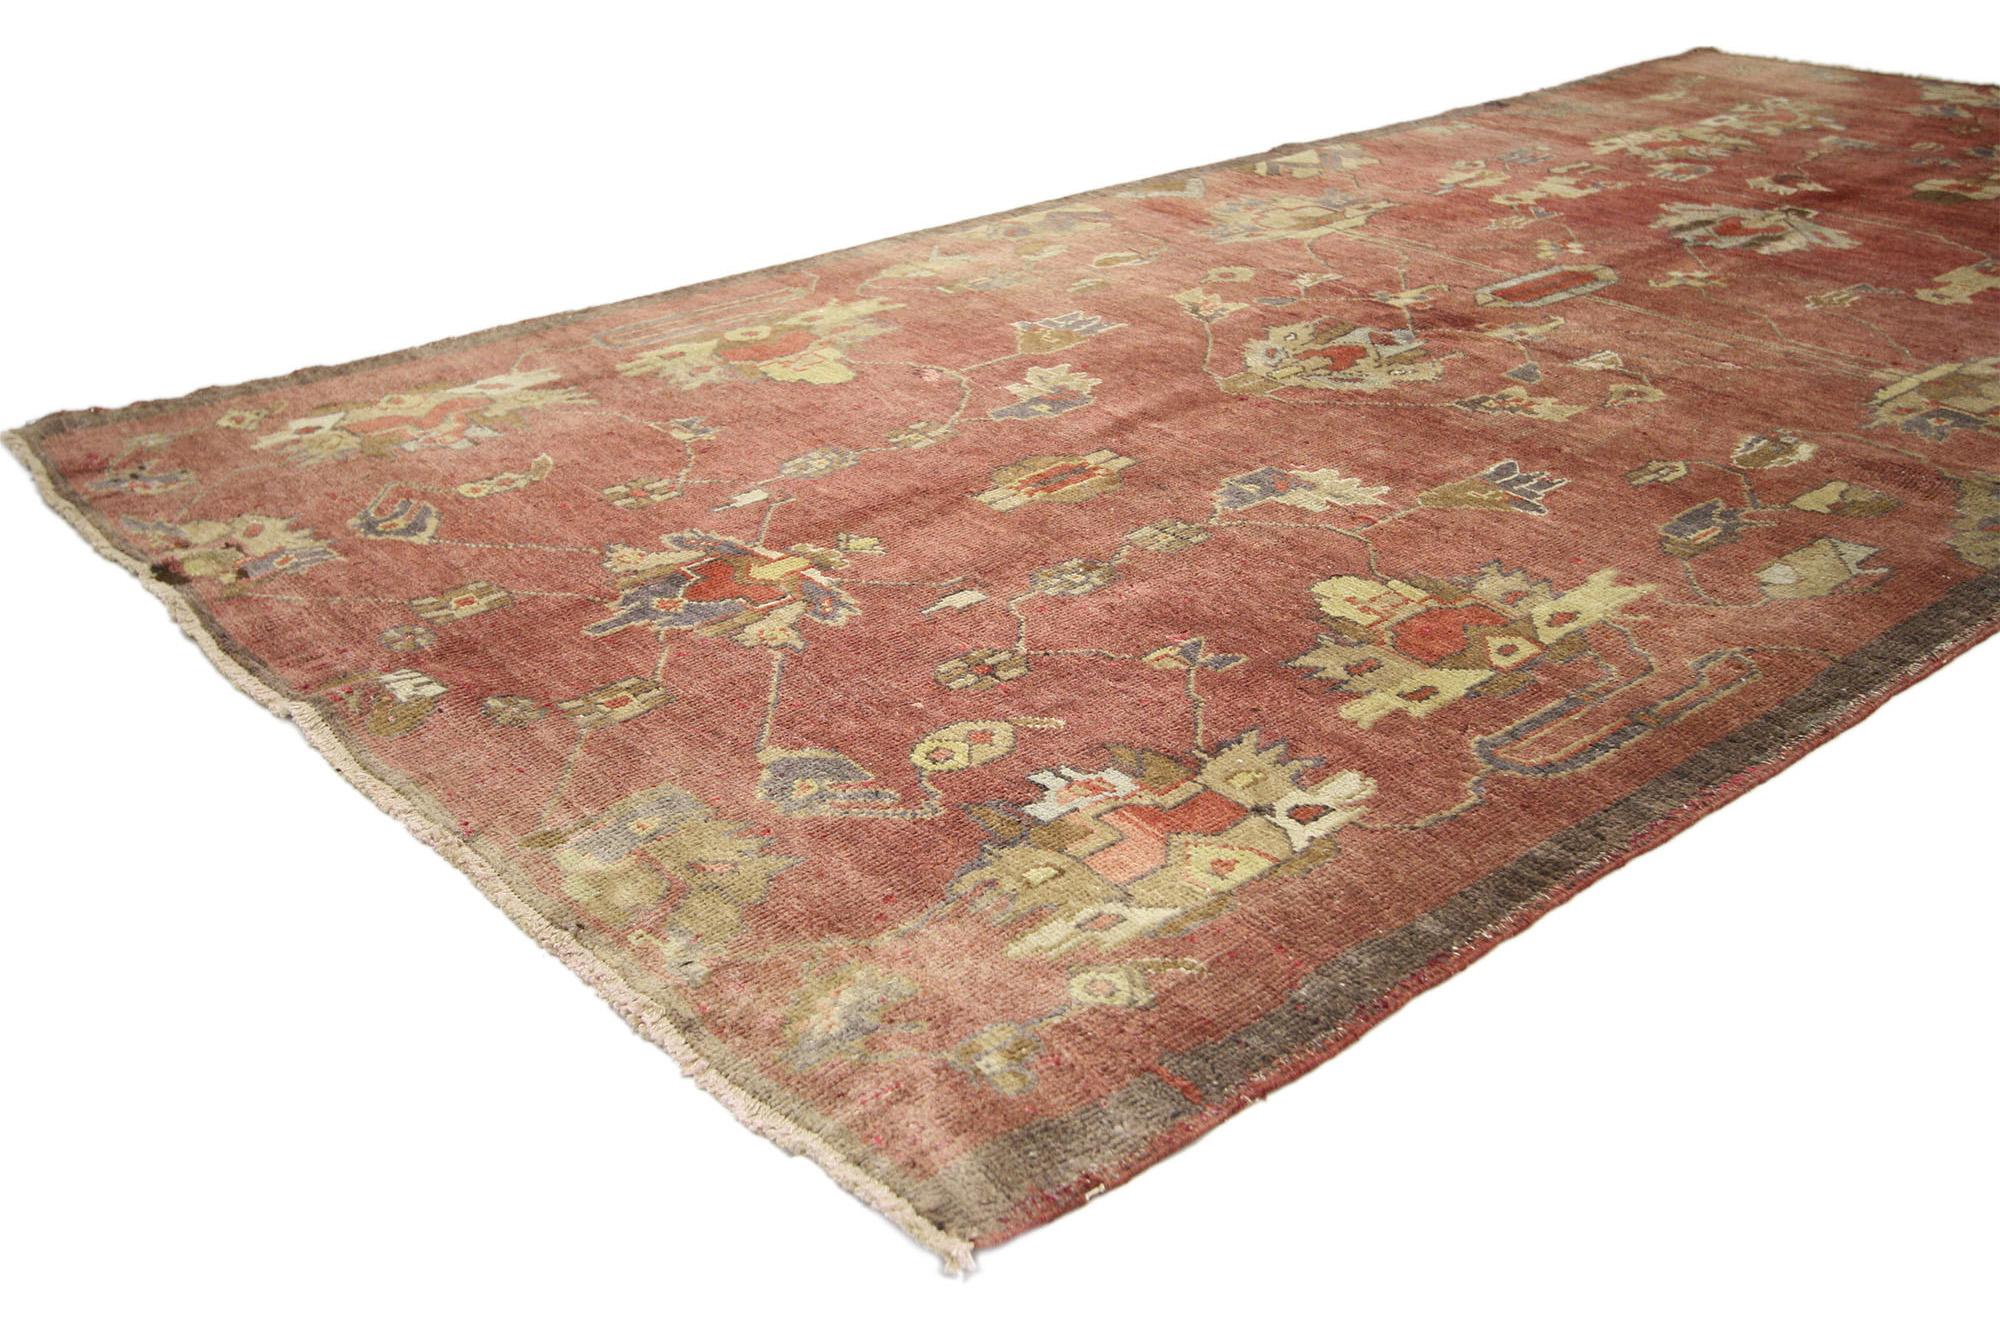 51402 Distressed Vintage Turkish Oushak Rug, 04'10 x 09'08. Incorporating Biophilic Design principles, this hand-knotted wool vintage Turkish Oushak rug seamlessly blends elements of nature with modern rustic aesthetics and traditional